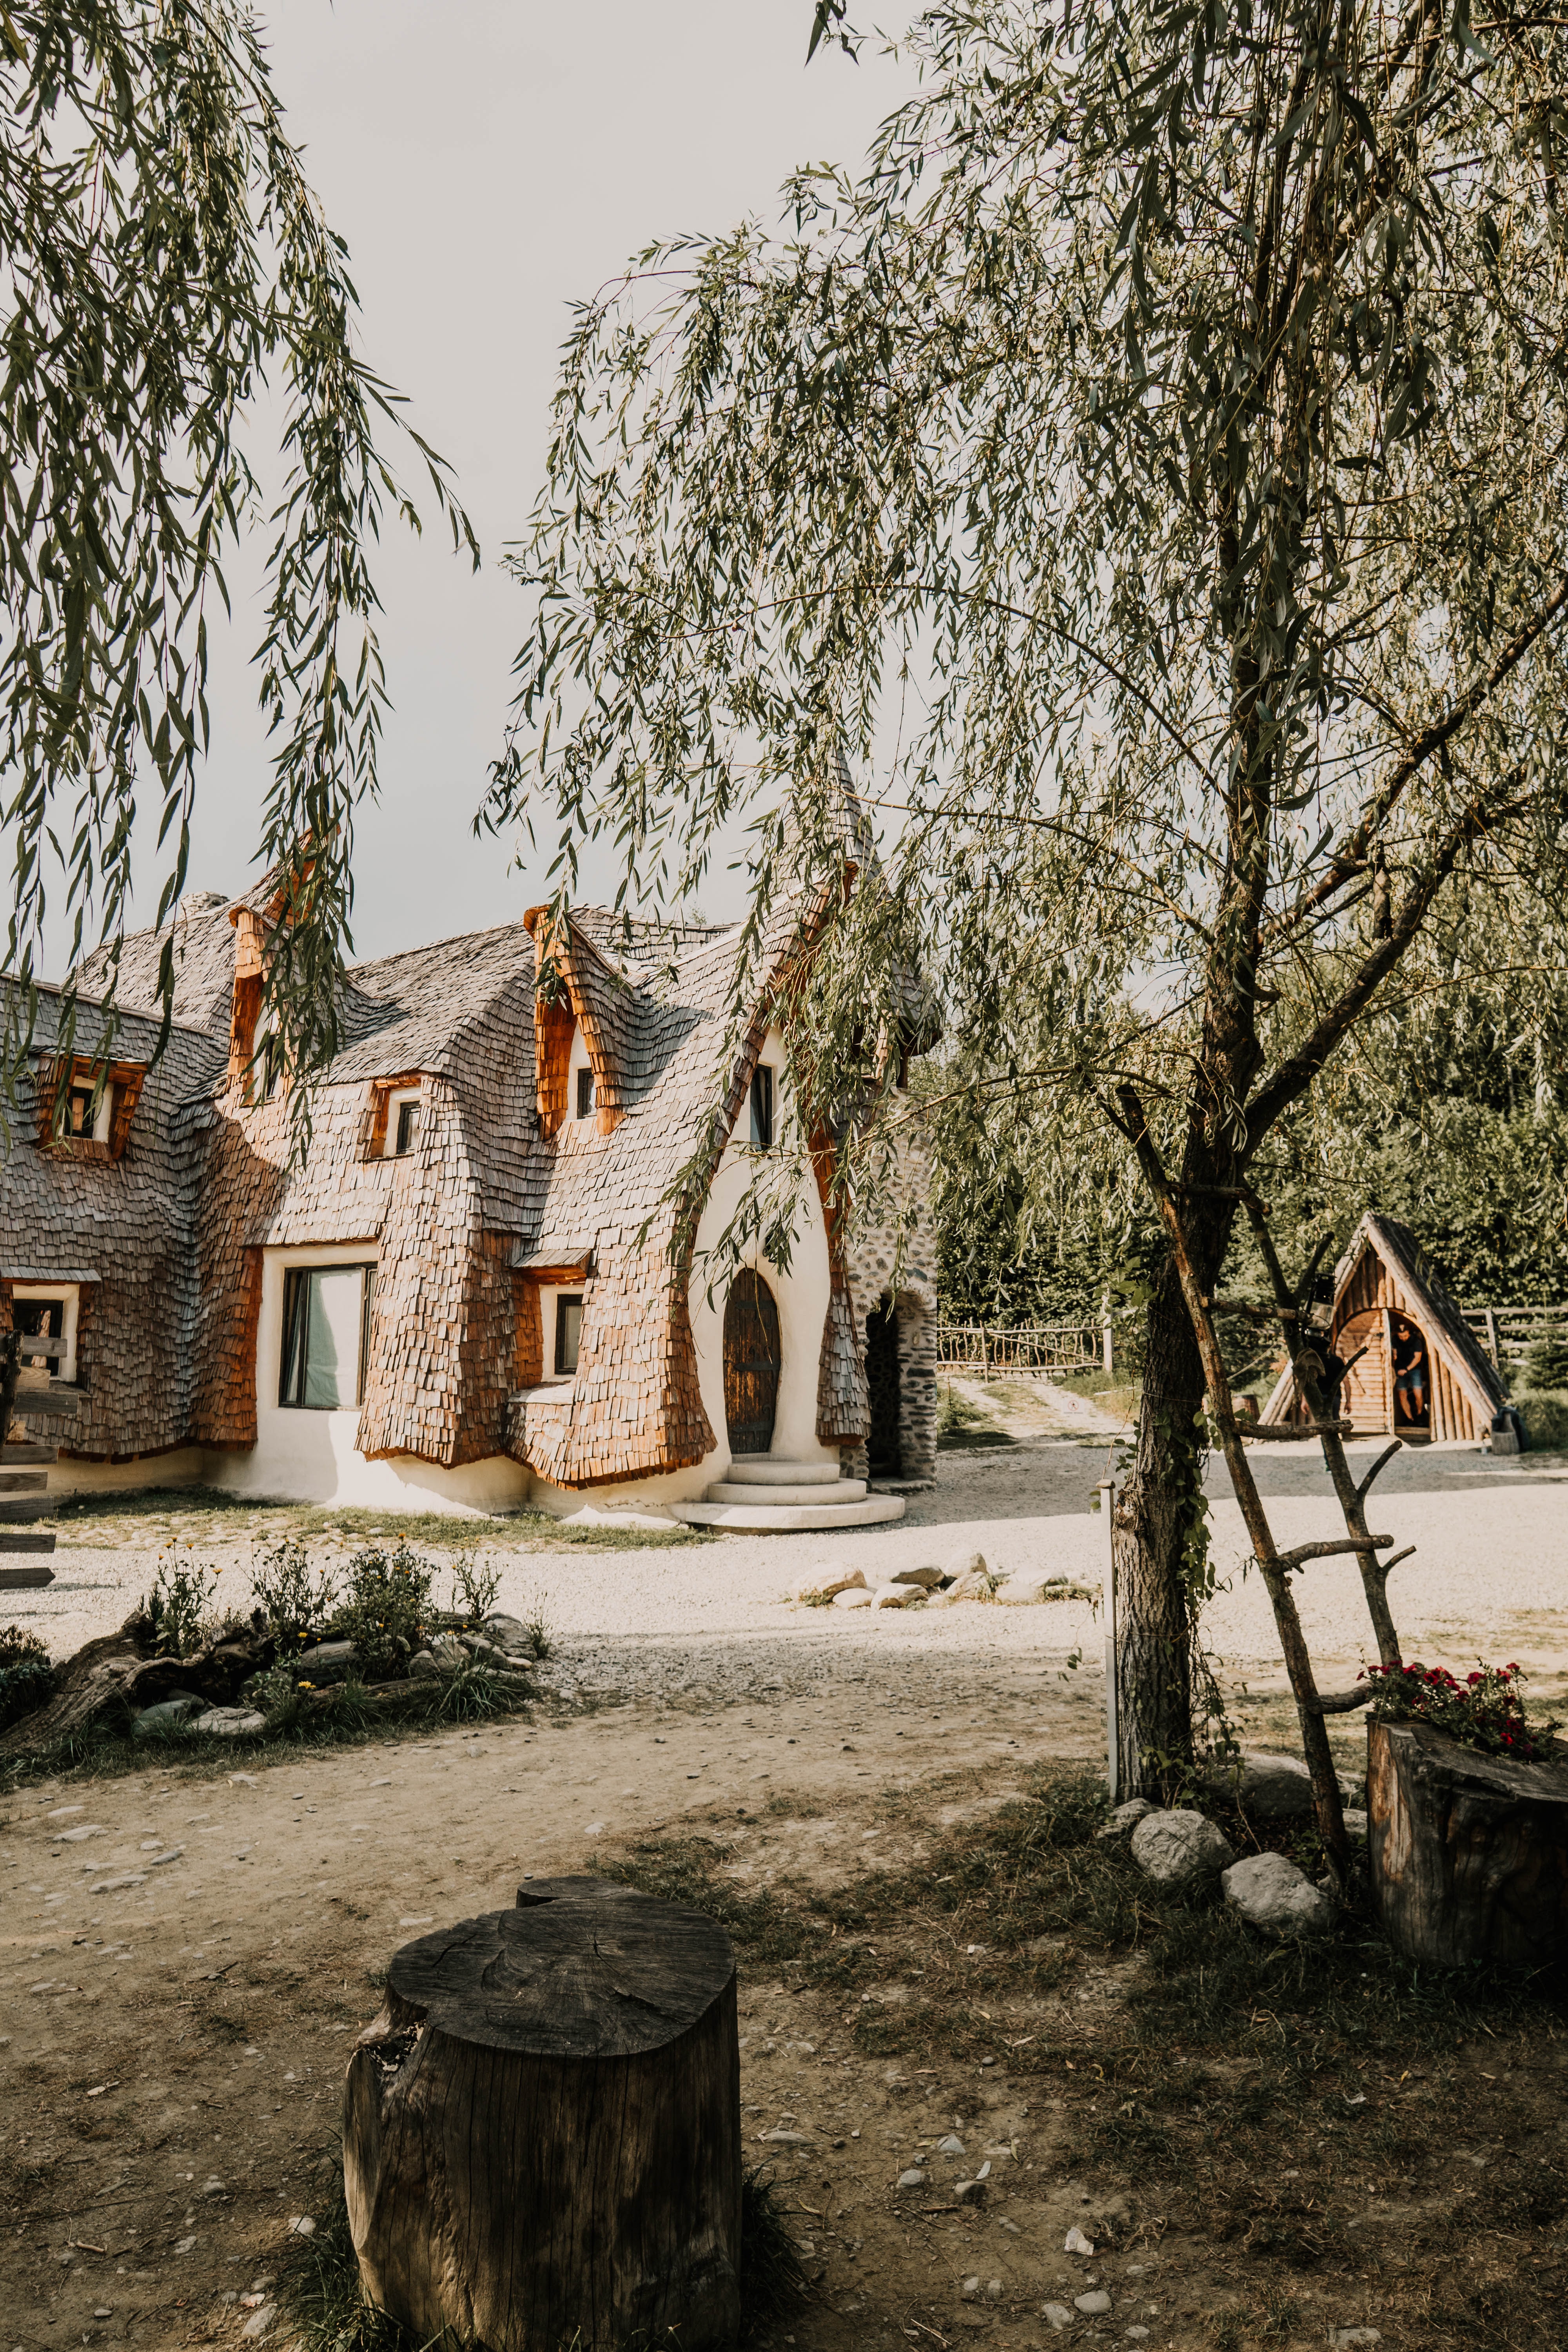 trees, architecture, building, miscellanea, miscellaneous, house, willow, and you